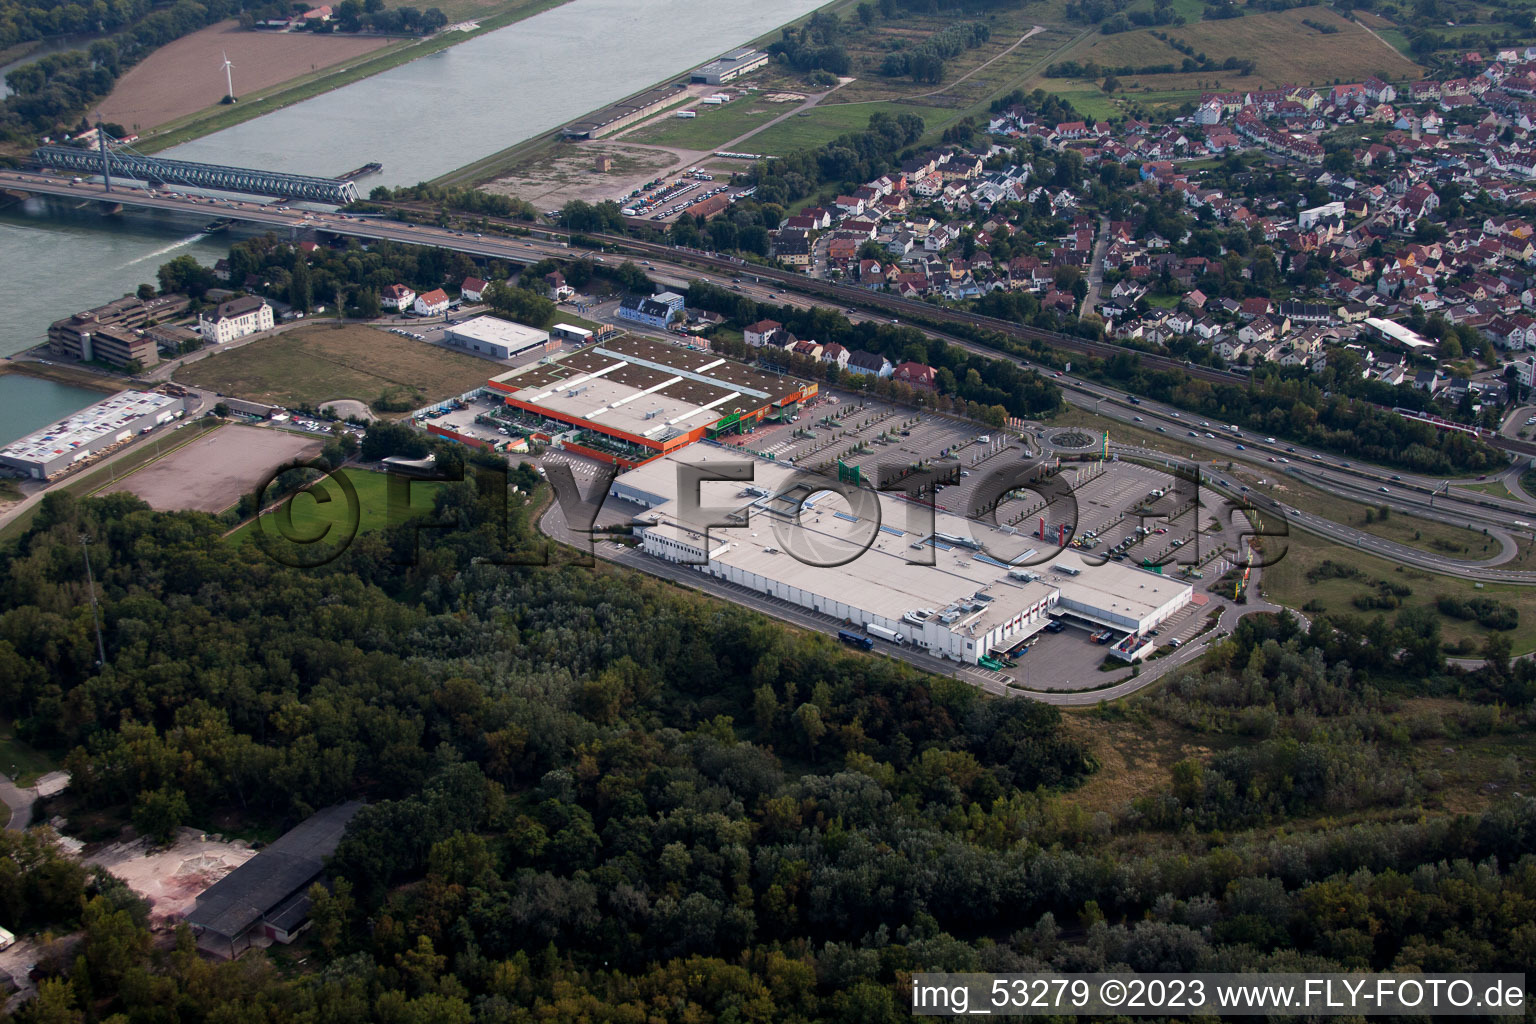 Maximilianscenter 2 in the district Maximiliansau in Wörth am Rhein in the state Rhineland-Palatinate, Germany from above